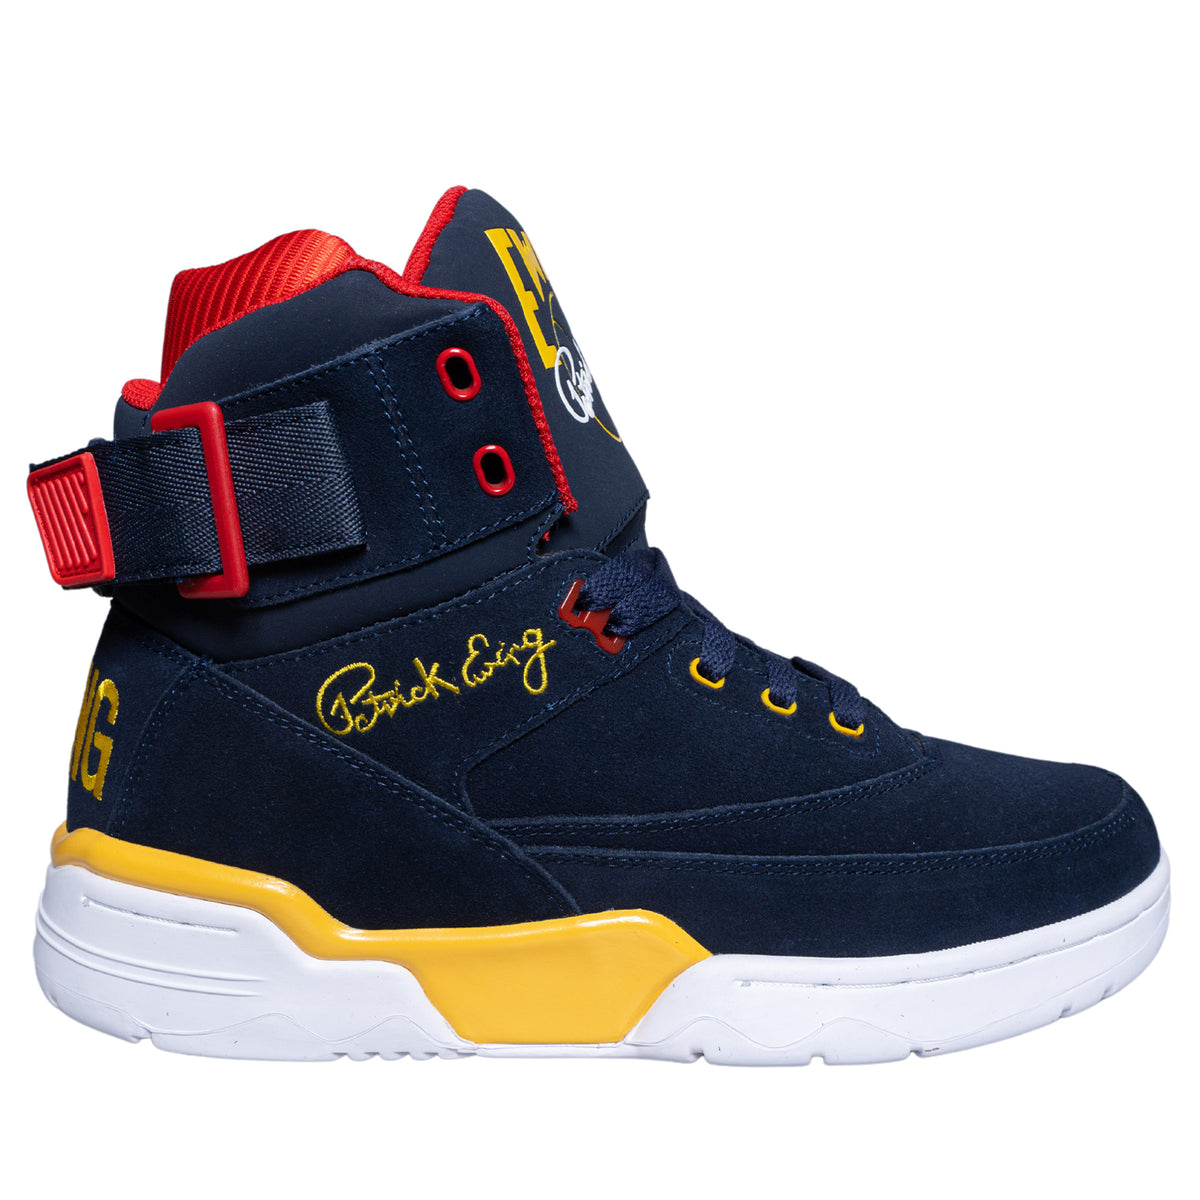 33 HI Sneaker  Navy, Red, And Yellow – Ewing Athletics